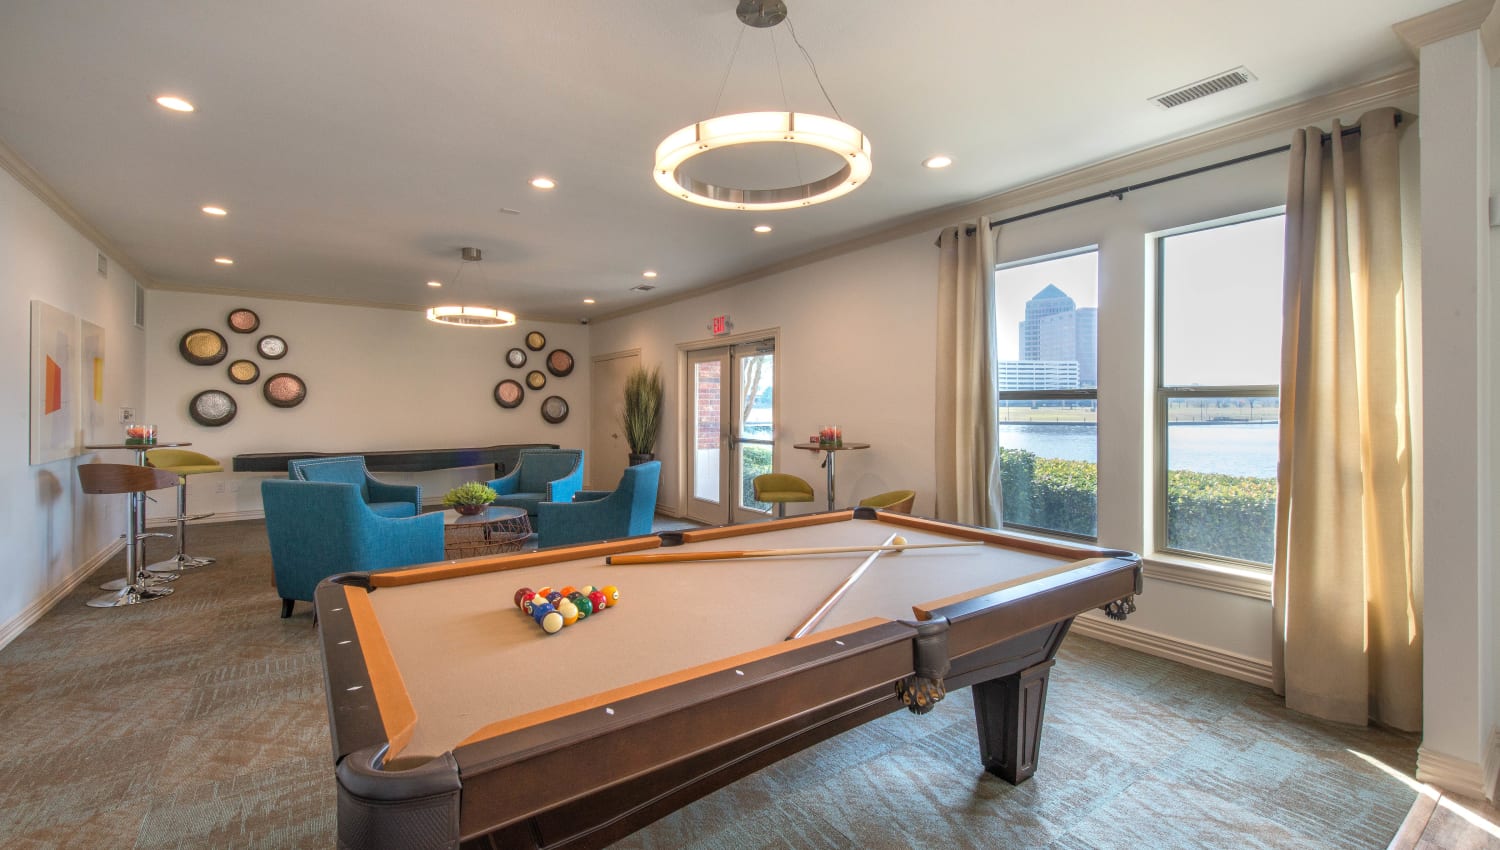 Billiards table and more in the clubhouse game room at Olympus Las Colinas in Irving, Texas